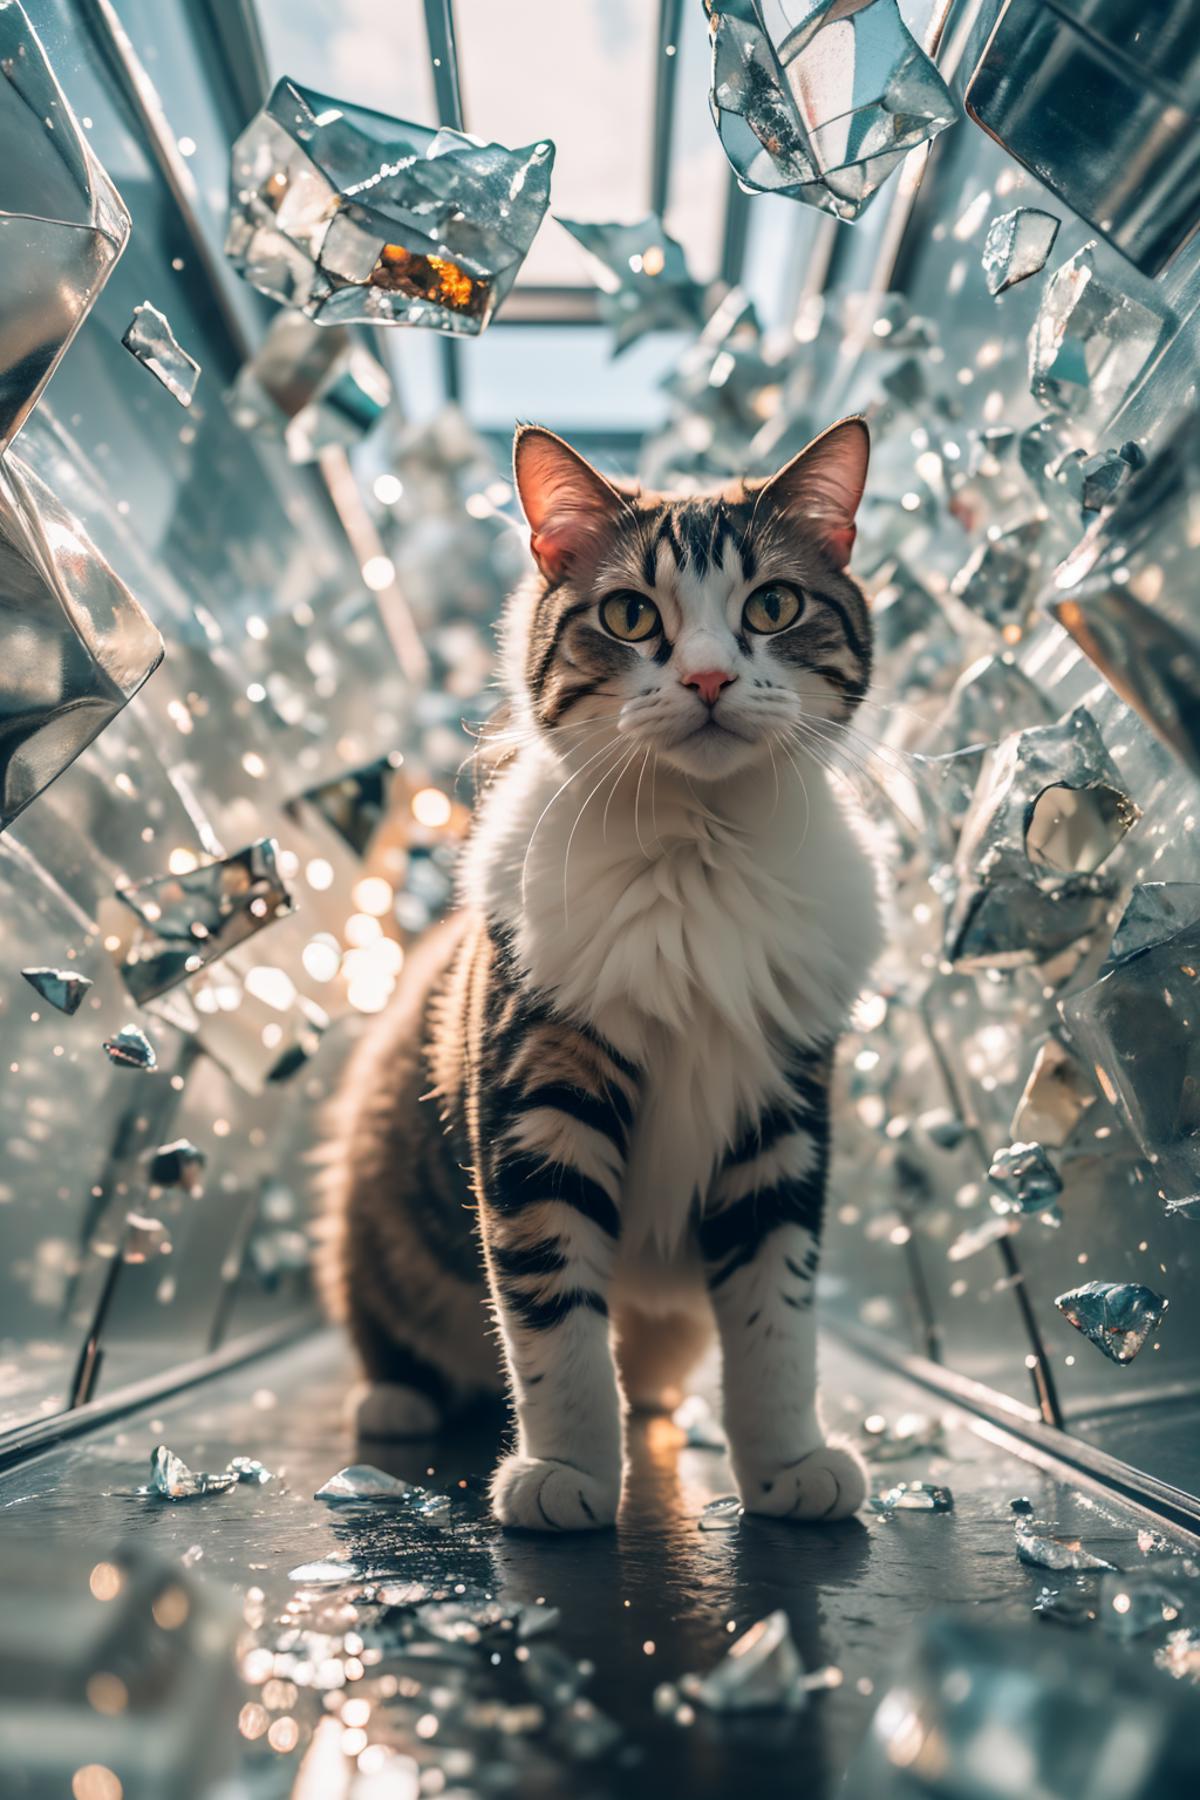 Cat in a room full of mirrors and shards of glass.